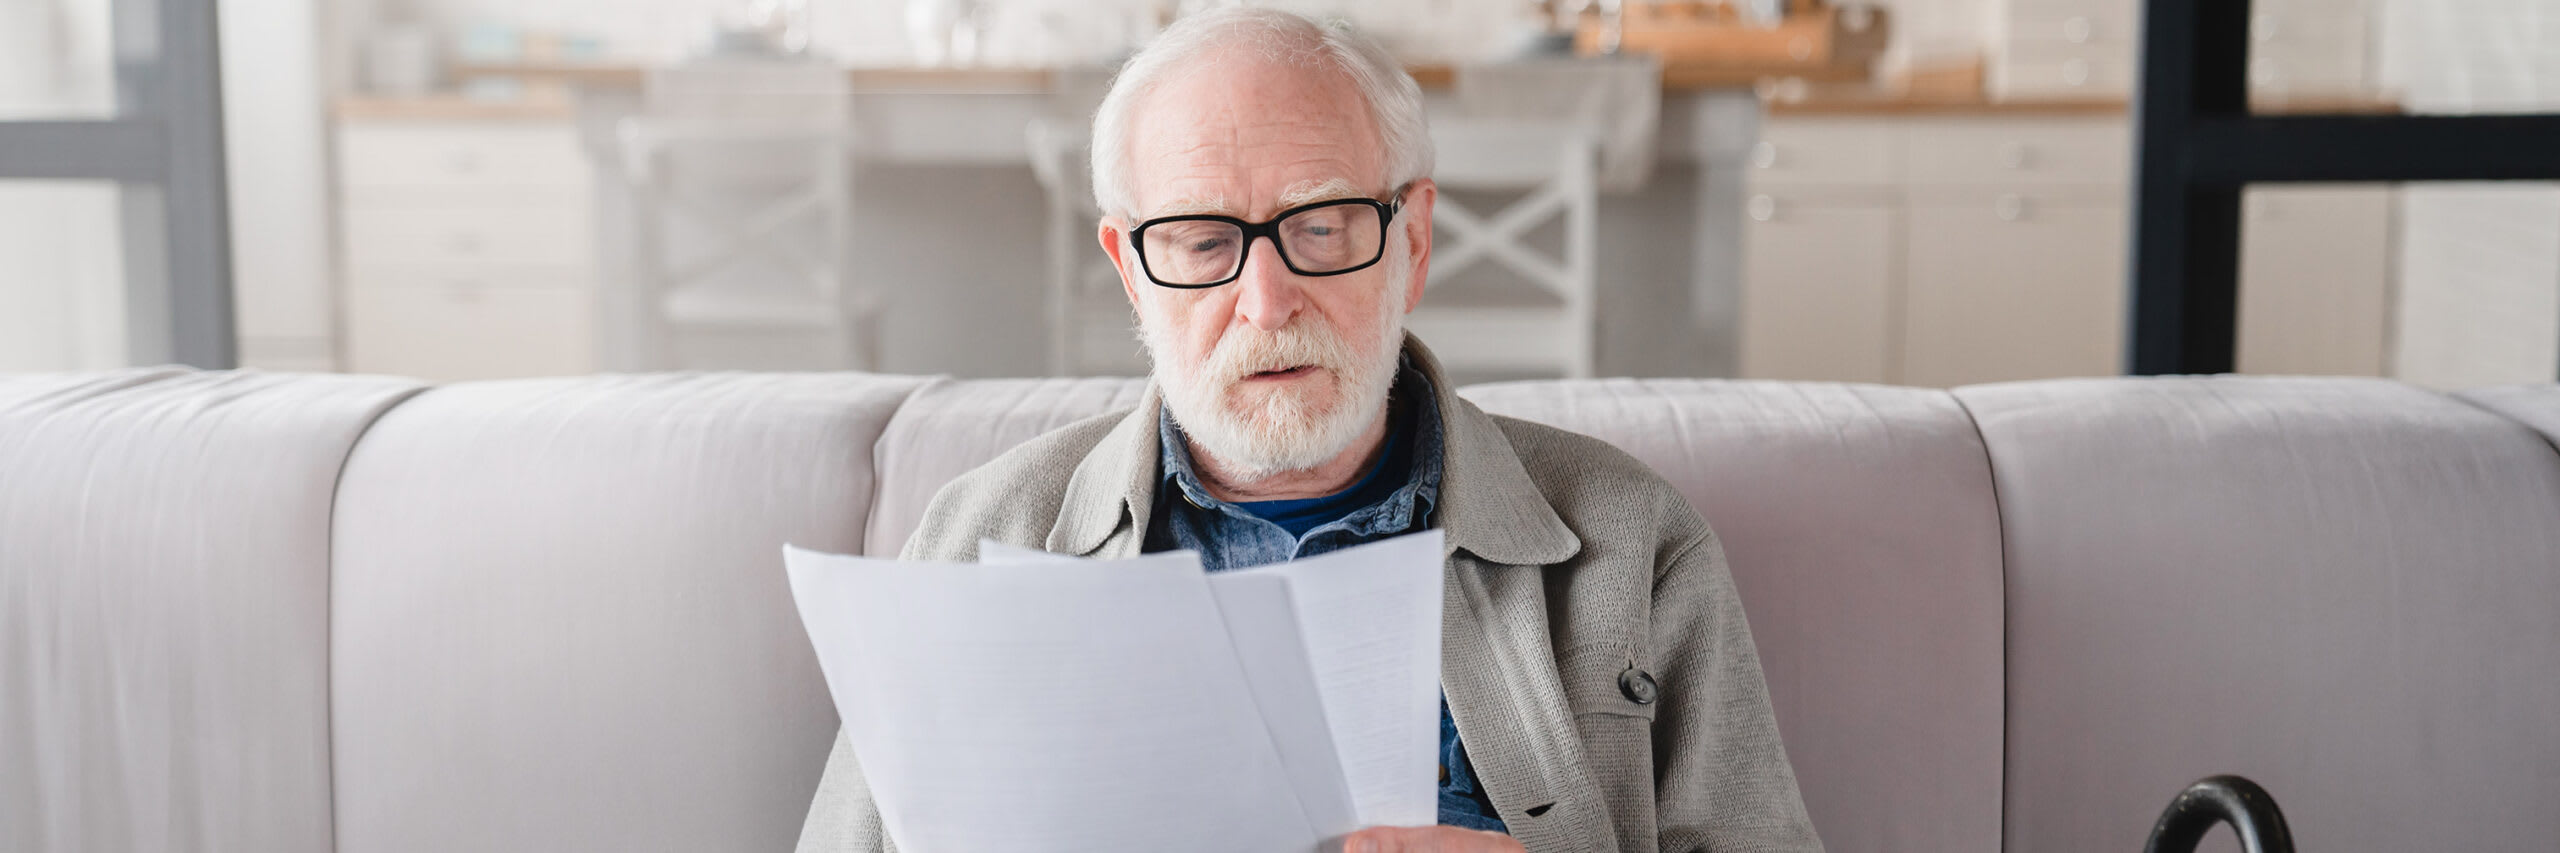 A senior man reviewing paperwork while appearing concerned